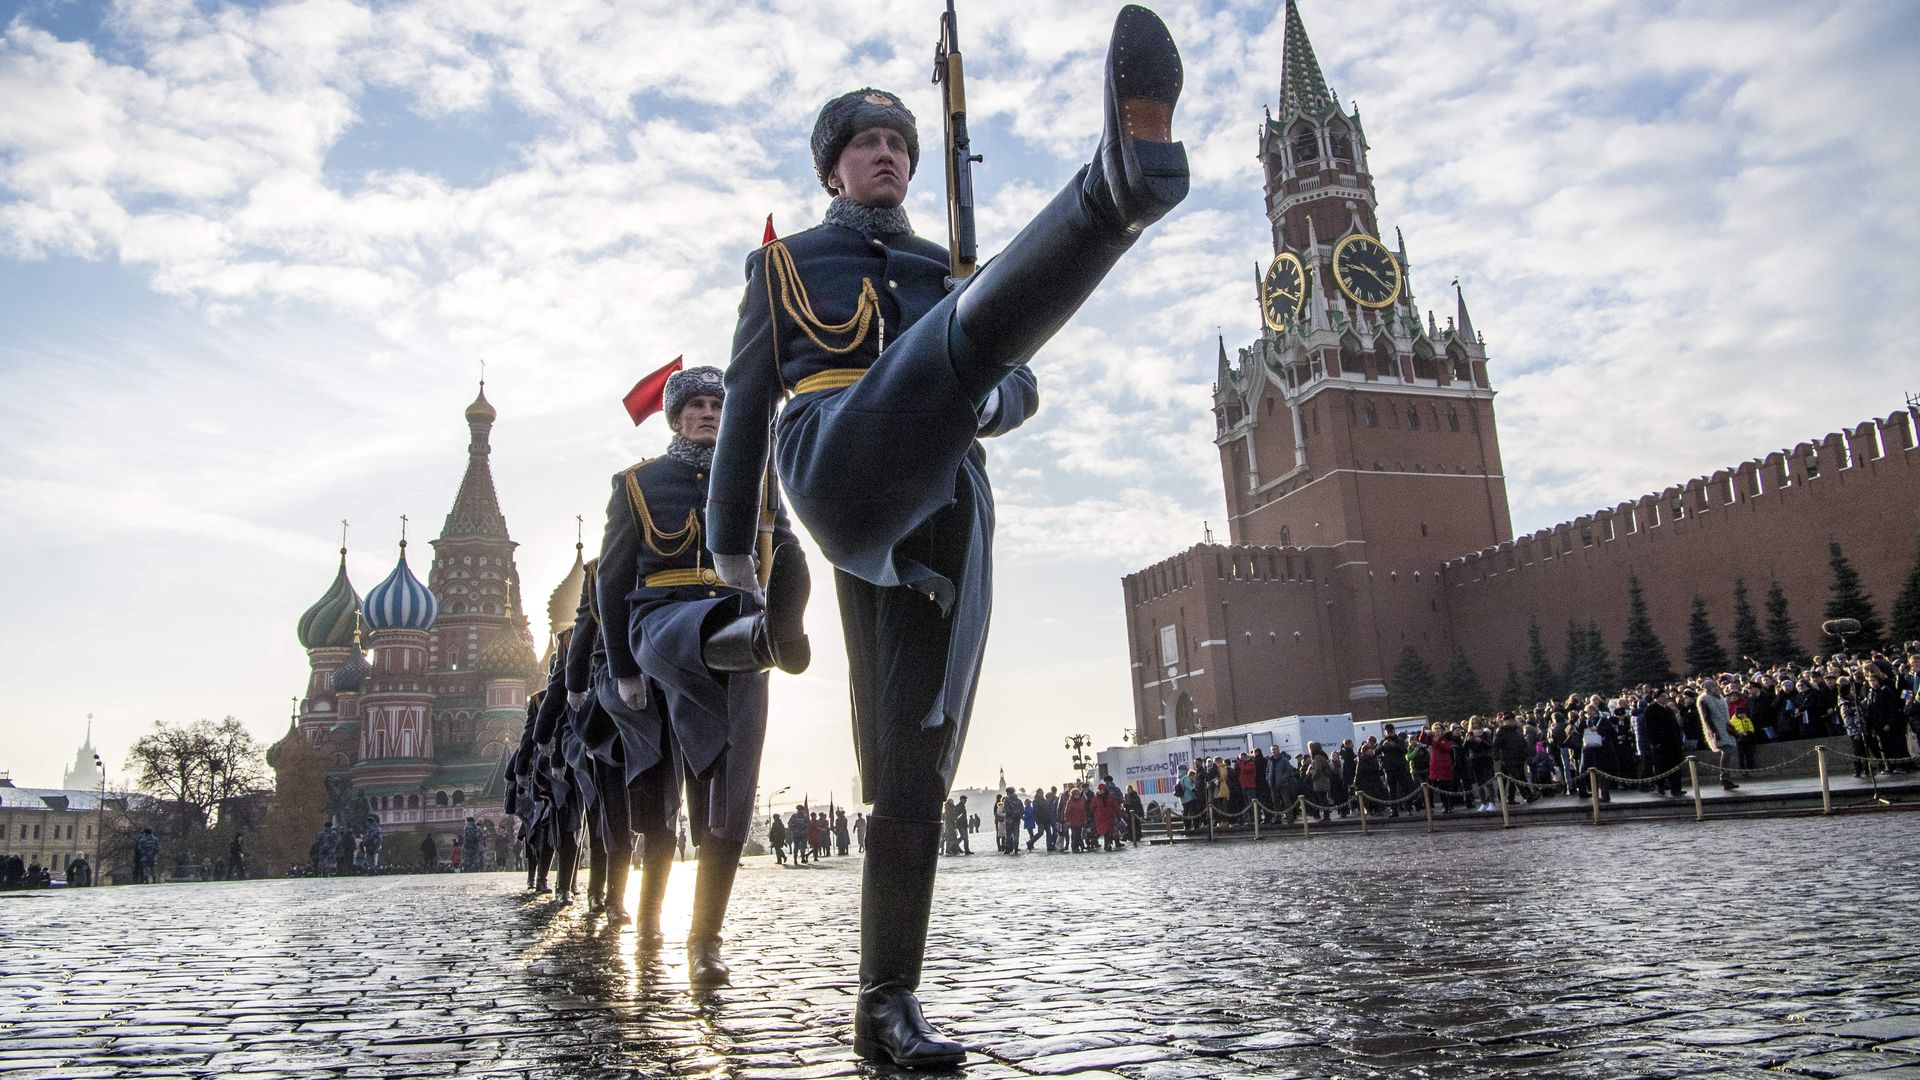  Russian honour guards march during the military parade at Red Square in Moscow 